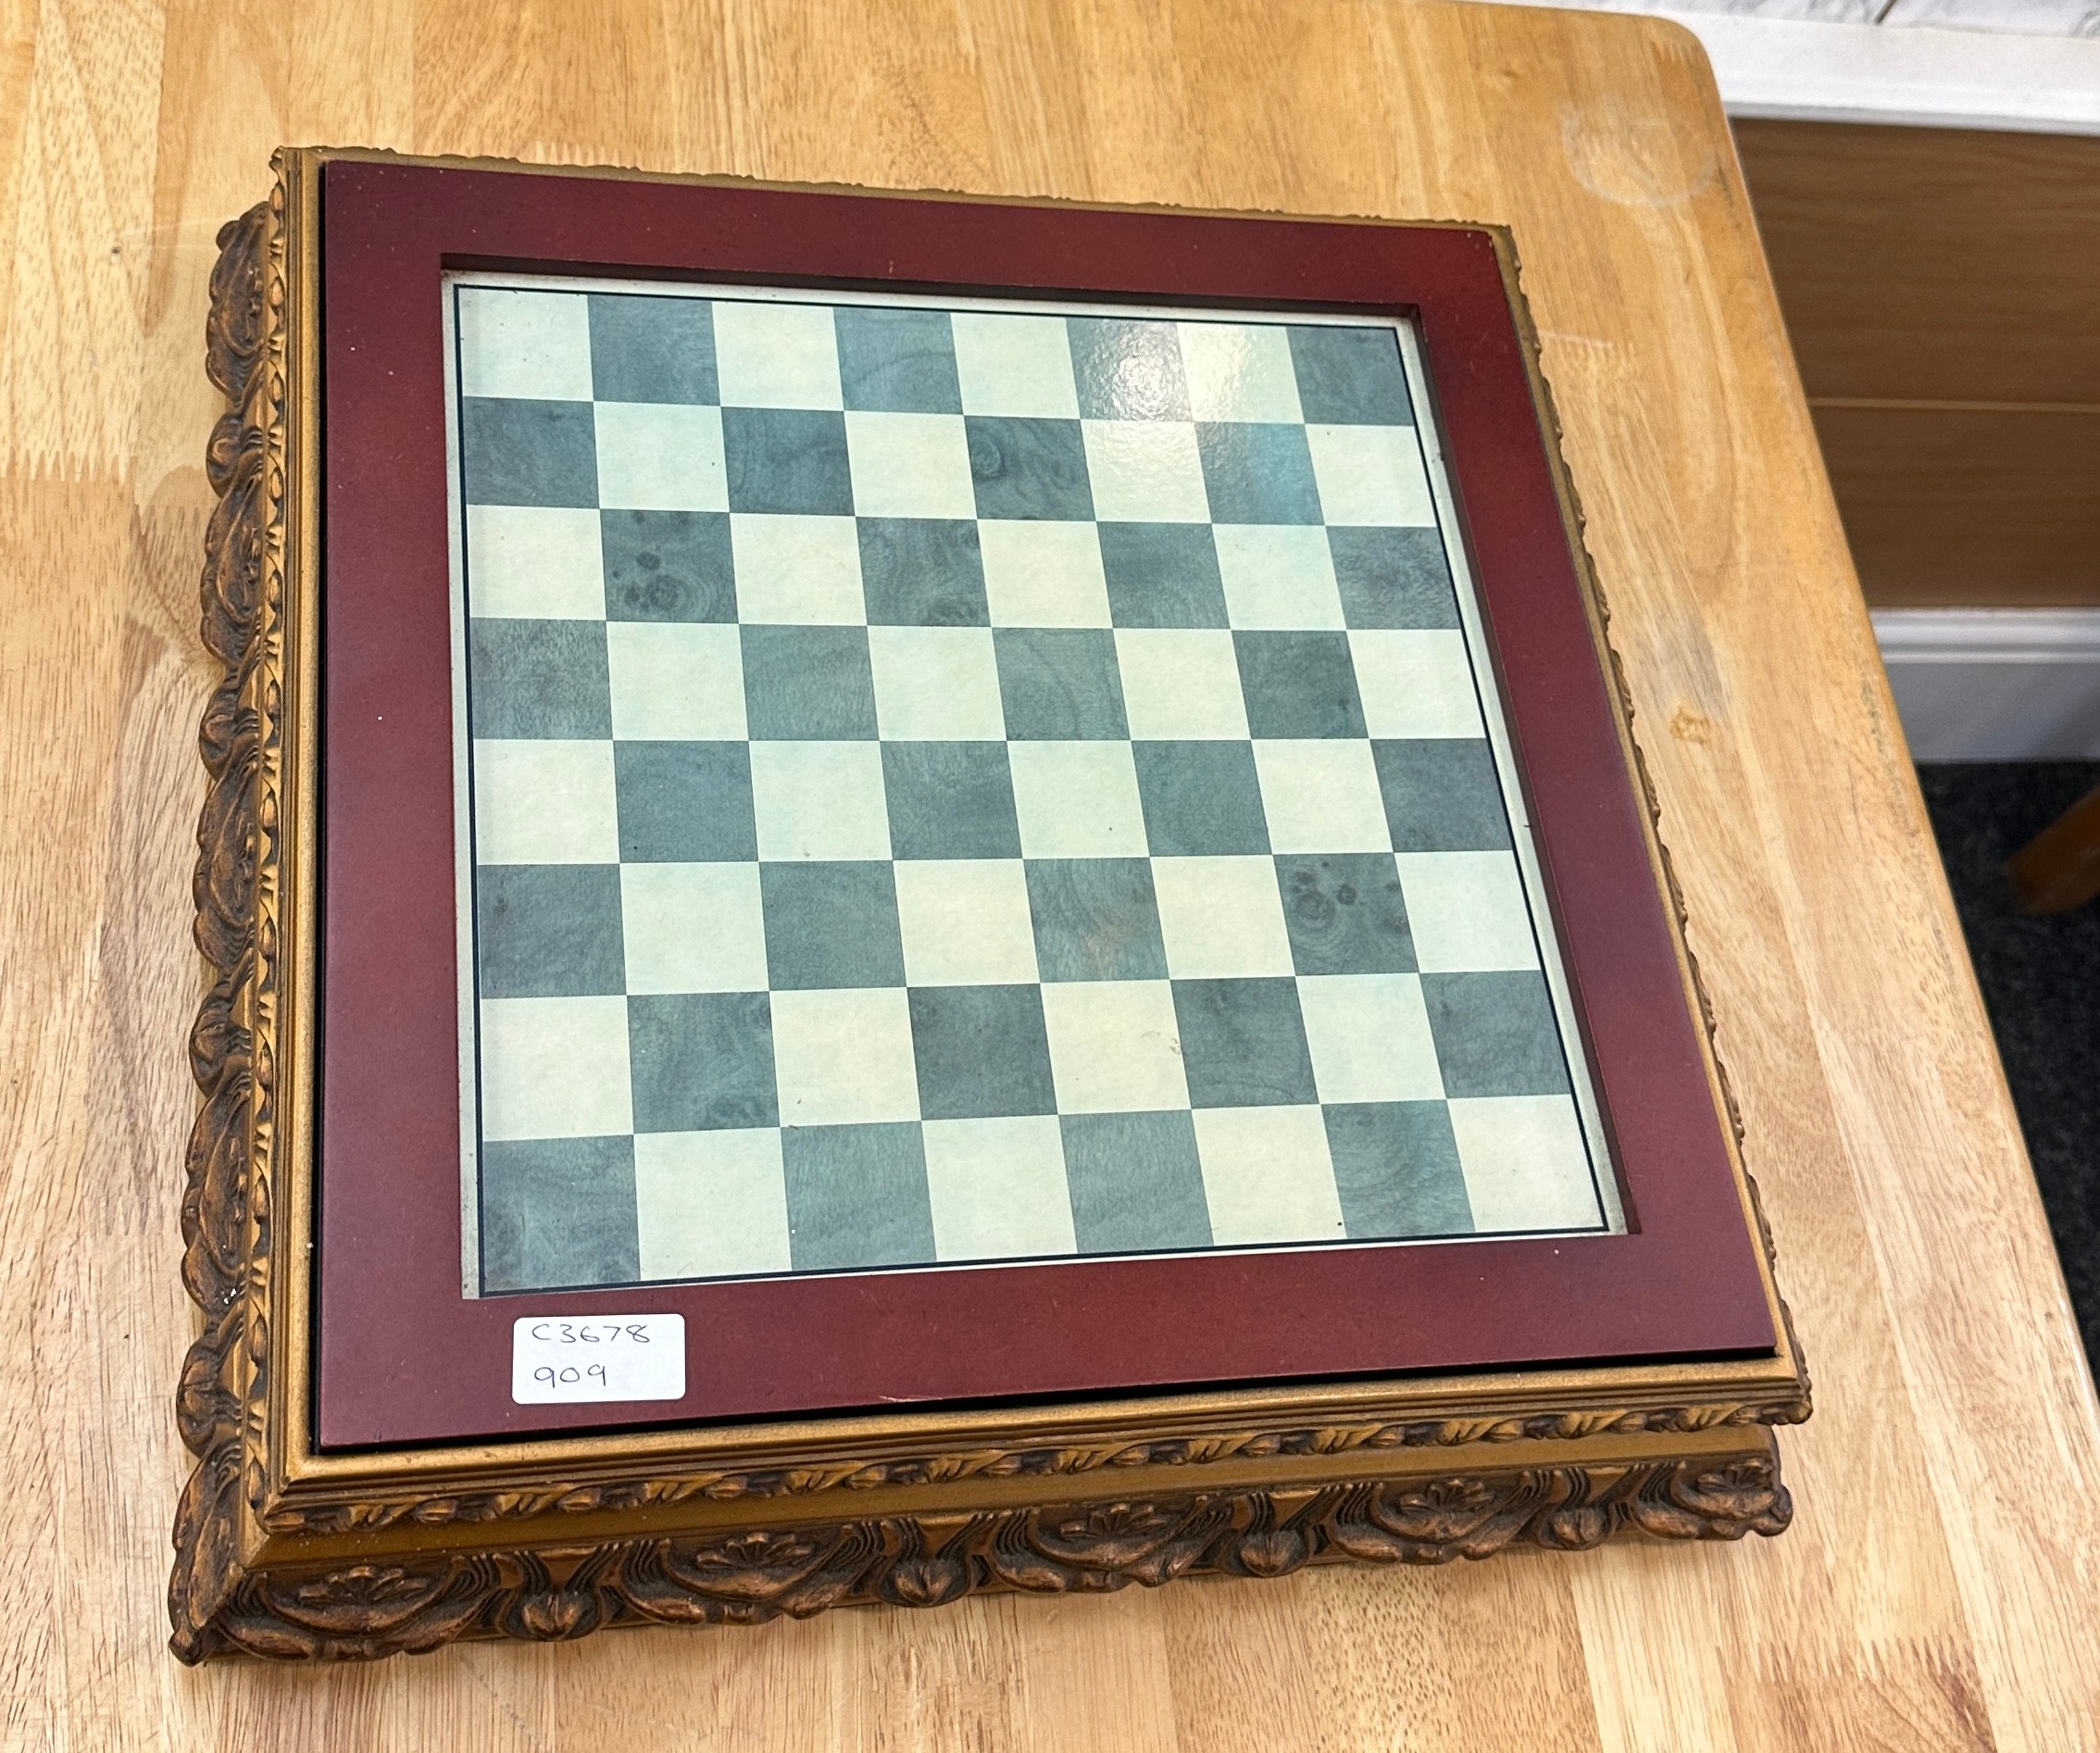 Complete chess set